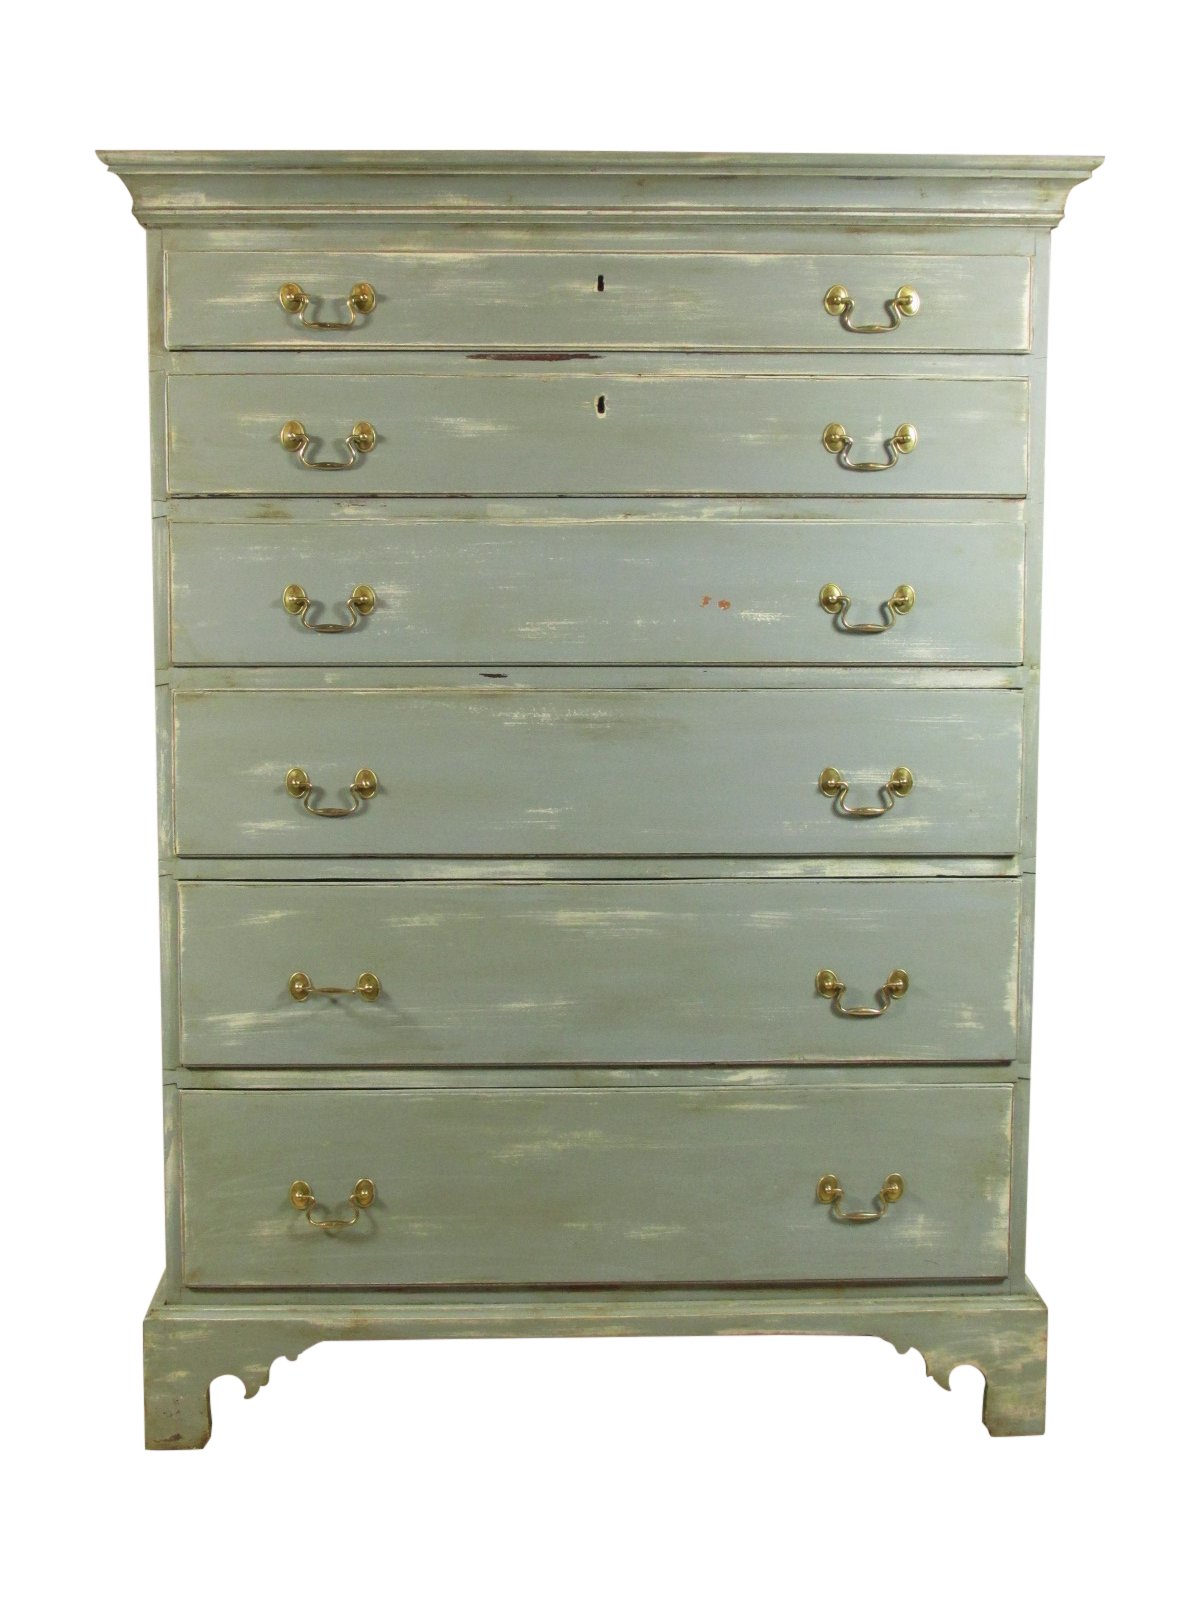 18th-C. American Painted Chest~P77620105